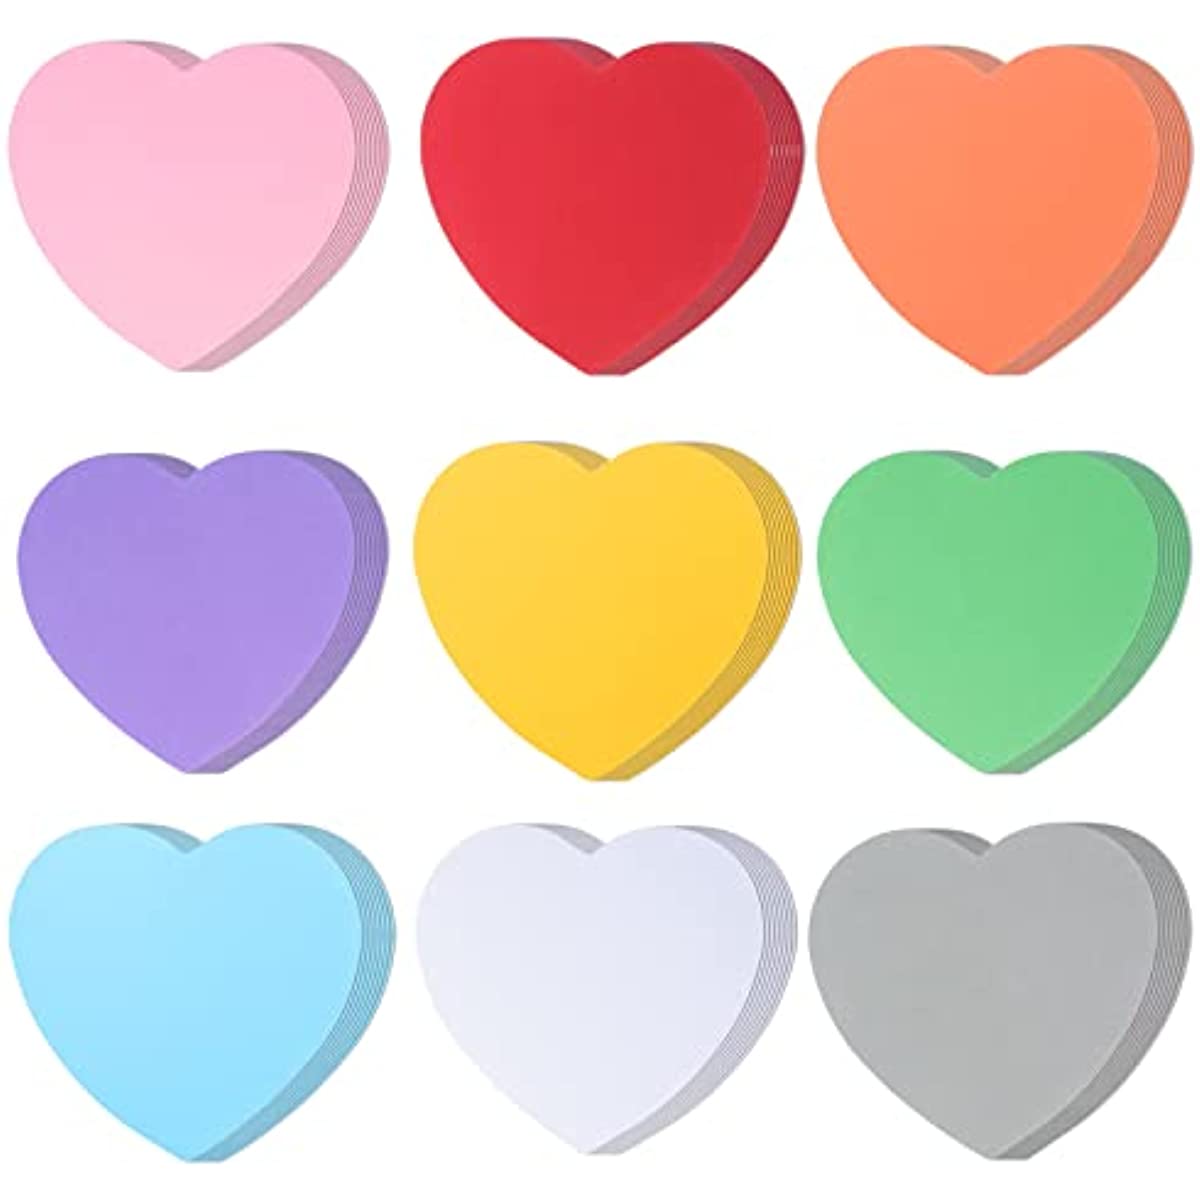  144 Pieces Heart Cutouts Paper Hearts 6 Inches Heart Shaped  Cards Large Heart Shapes Paper Heart Shape Die cuts for Valentine's Day  Craft, Kid's Love and Peace School Craft Projects 